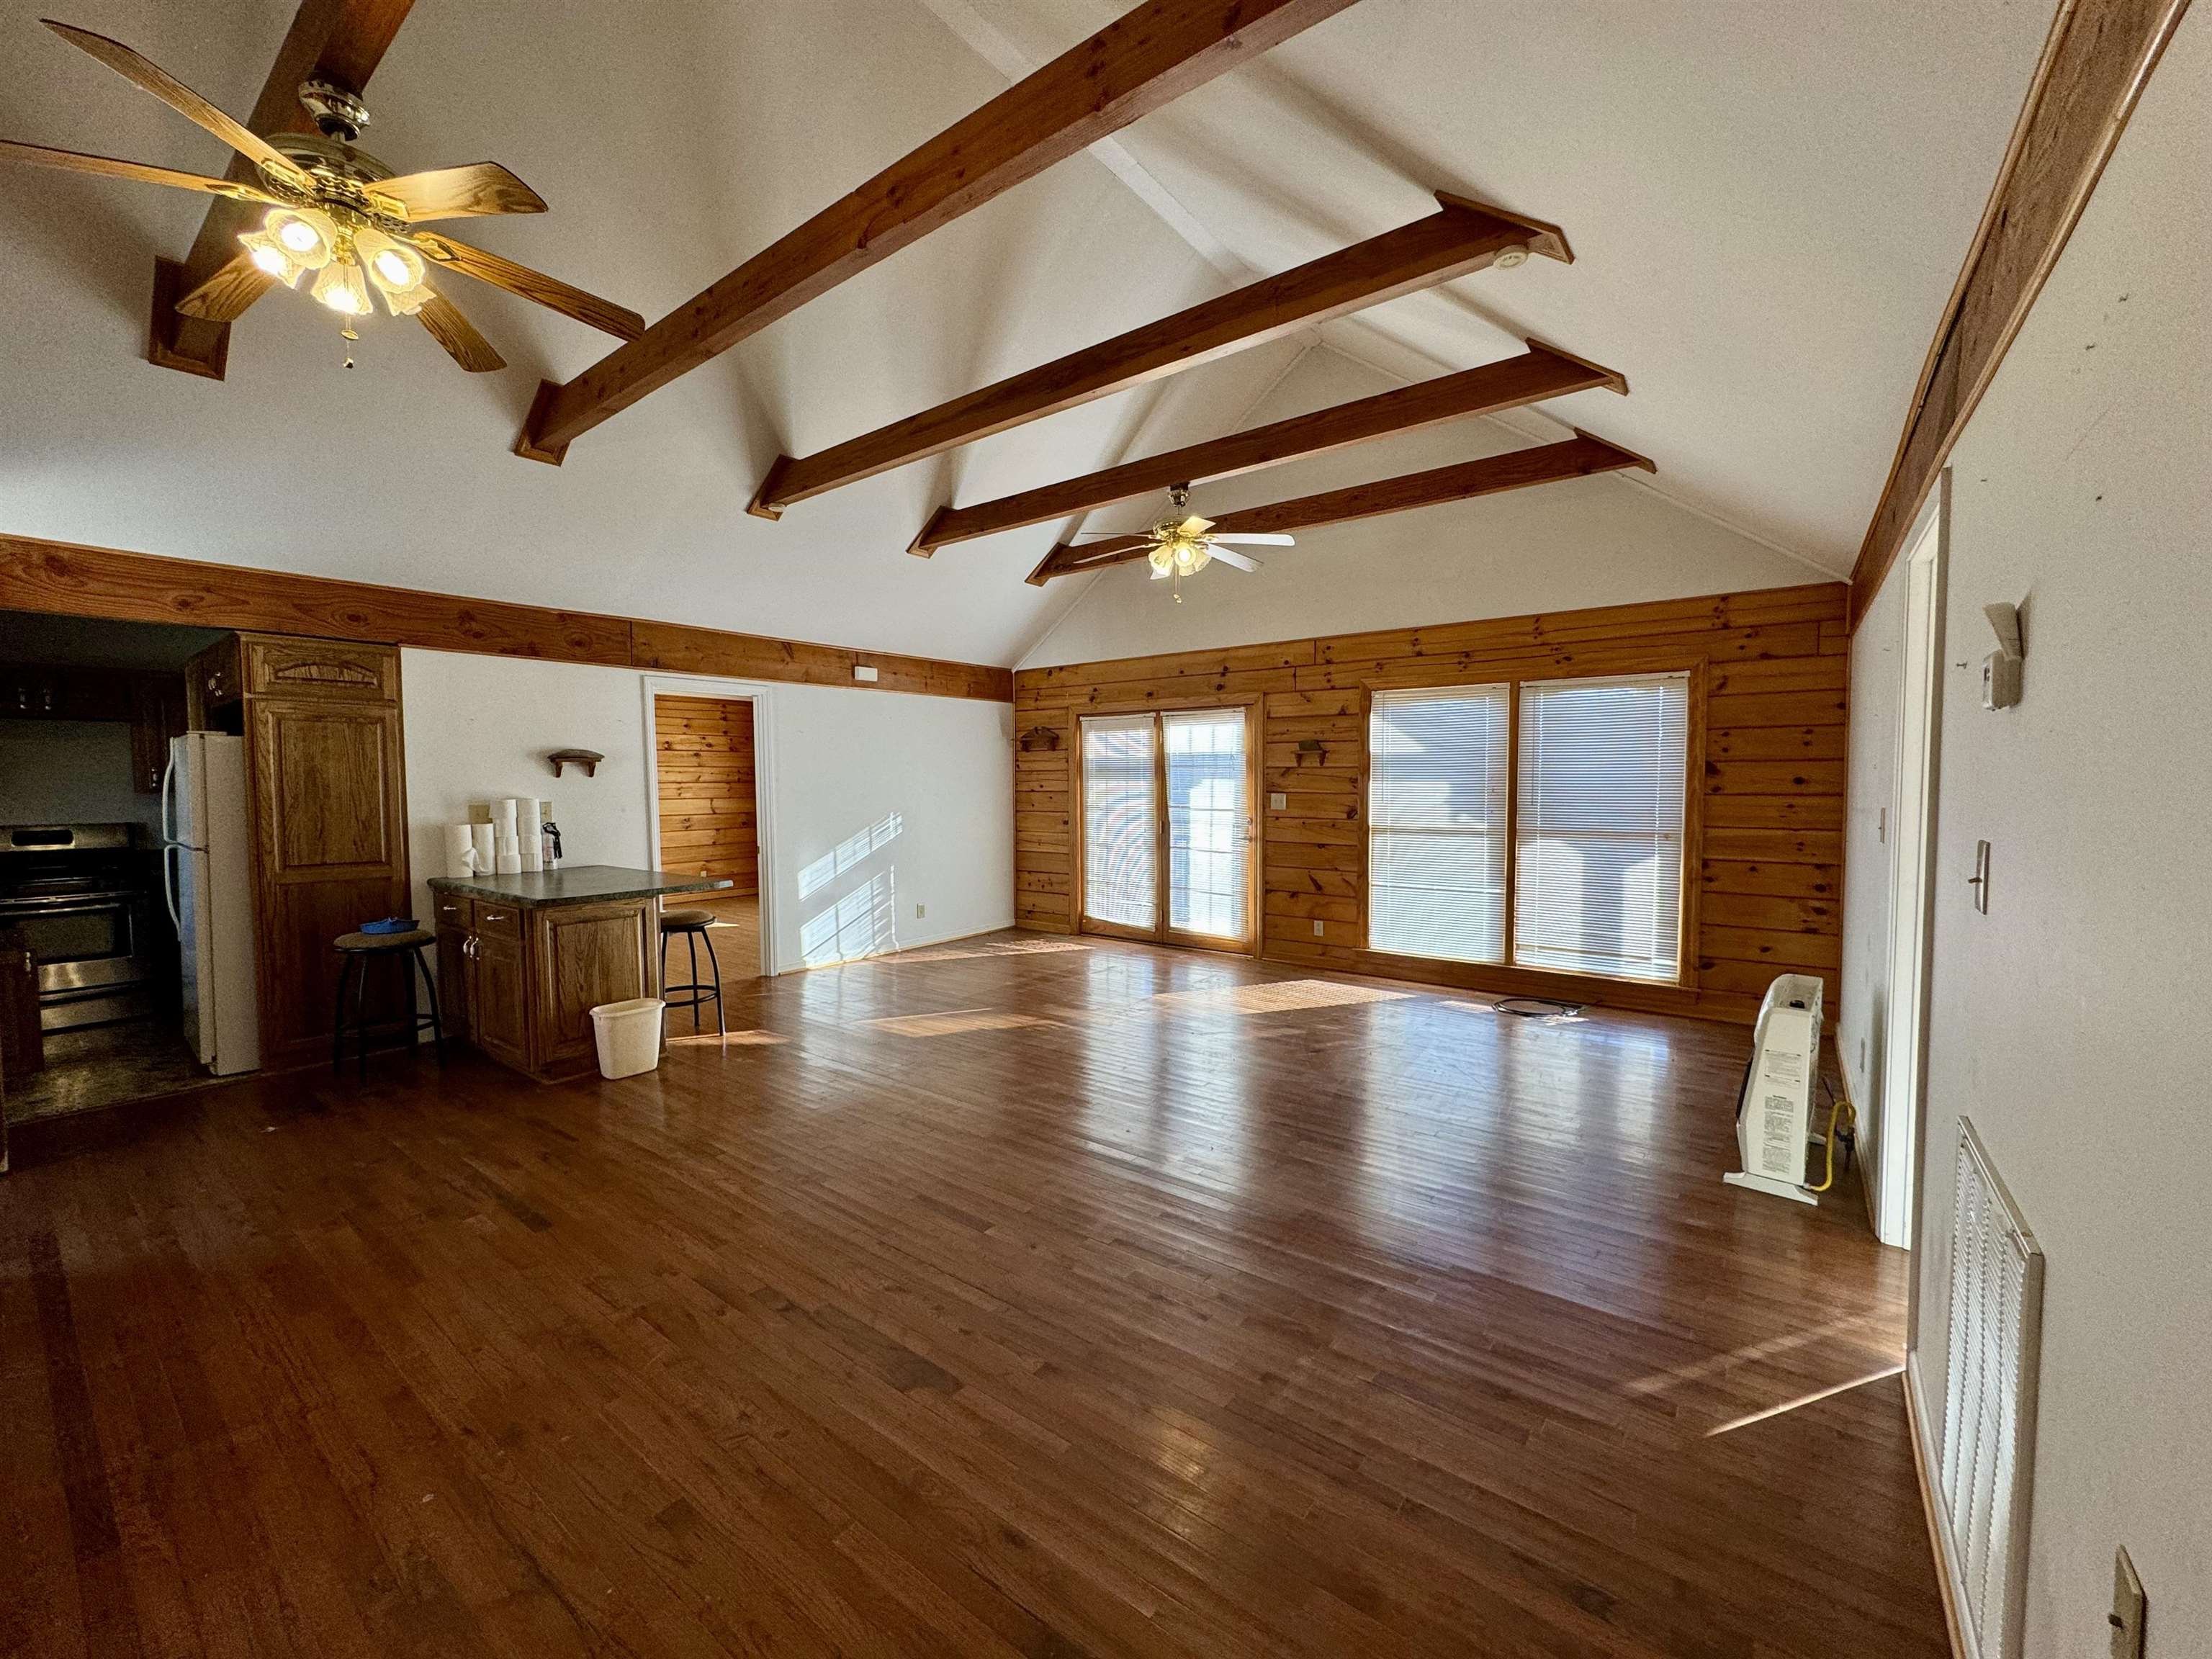 a view of a hall with wooden floor